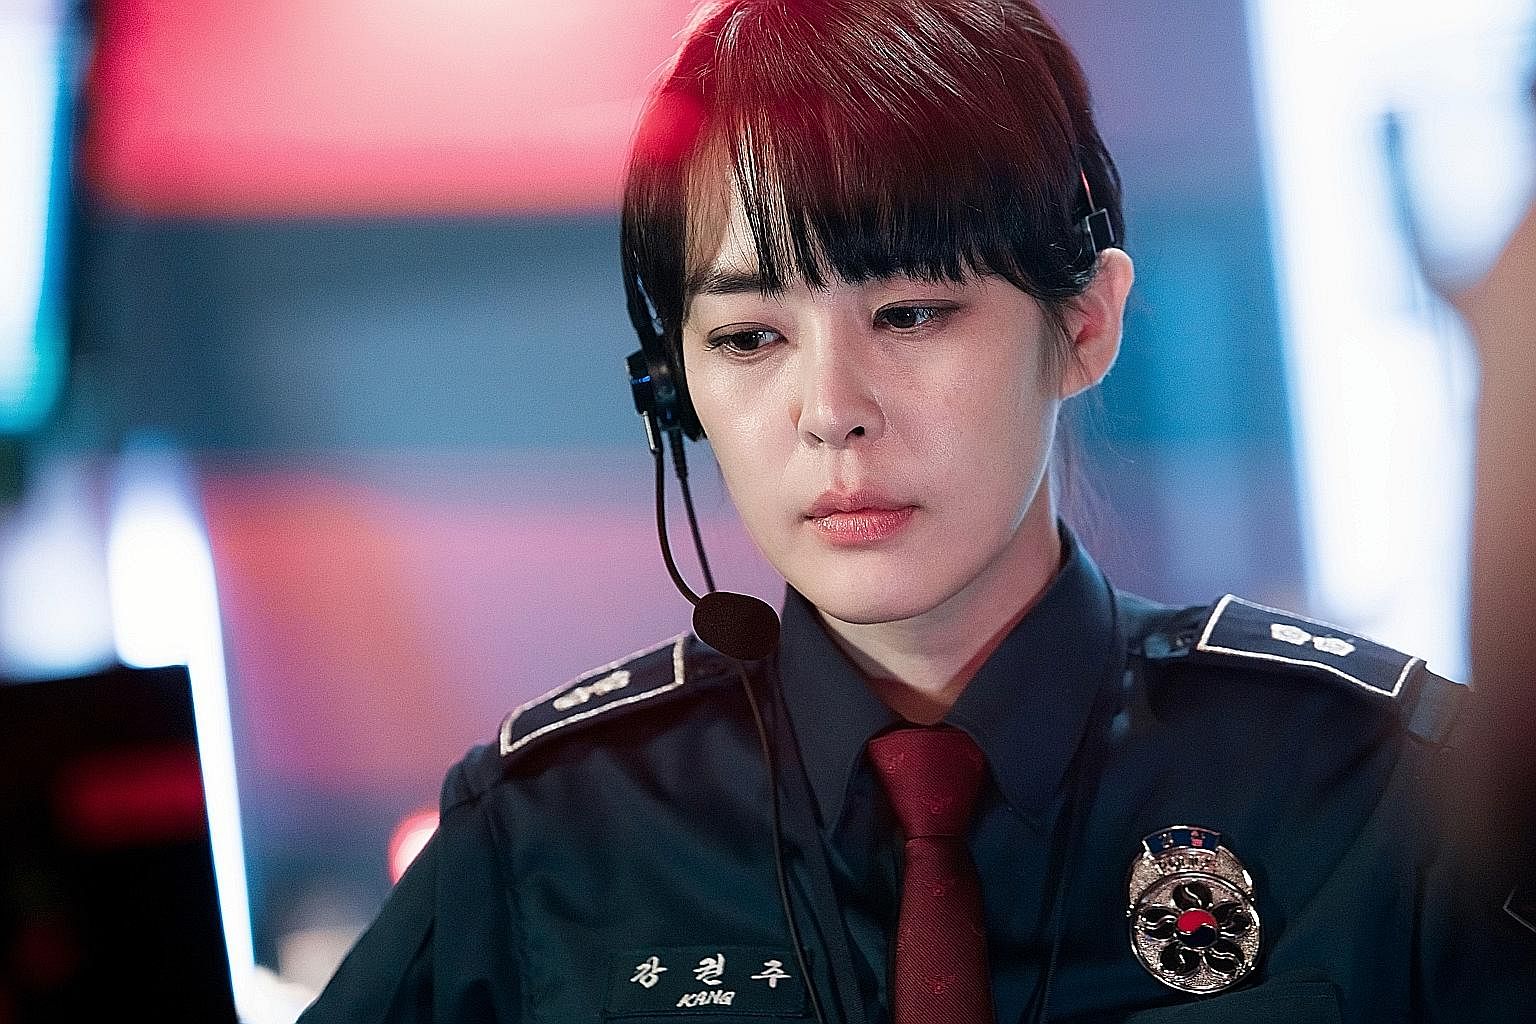 Lee Ha Na plays a rookie policewoman in Voice.